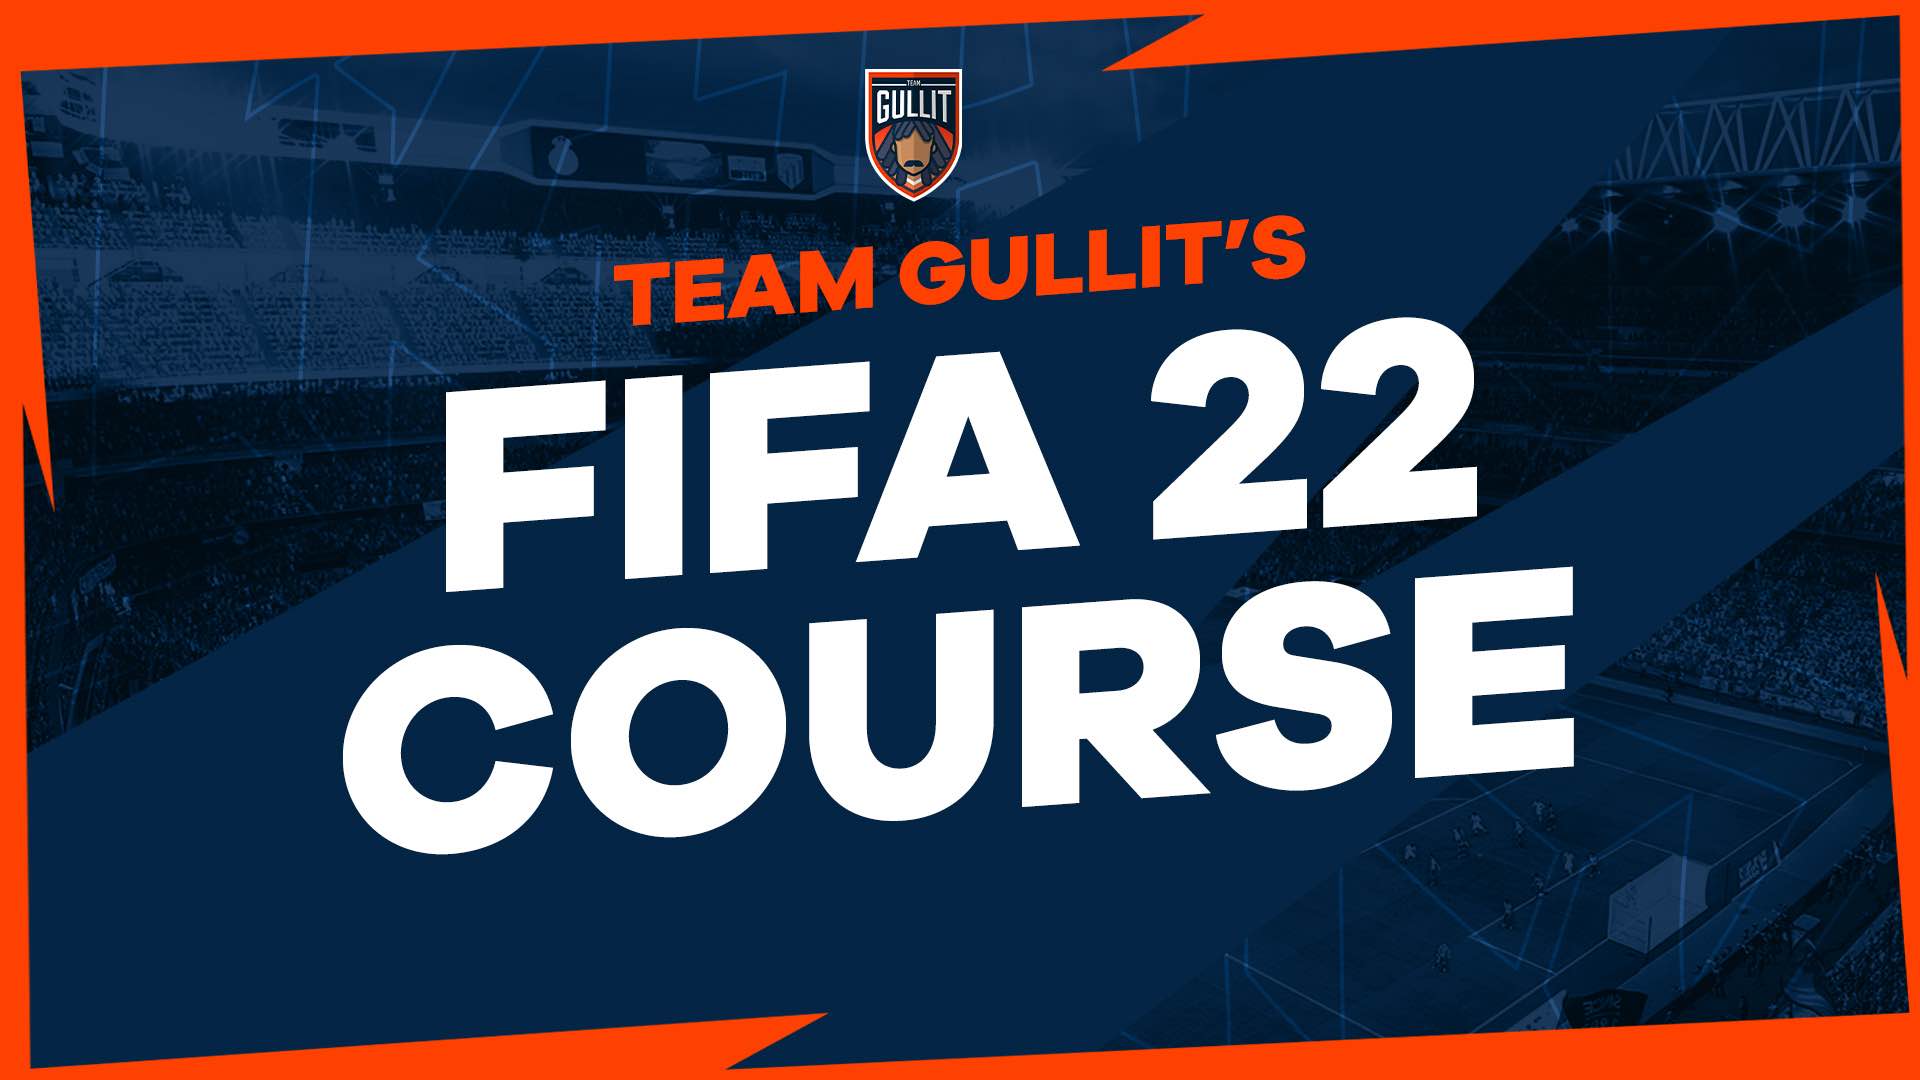 This is a thumbnail with the Team Gullit FIFA 22 Course